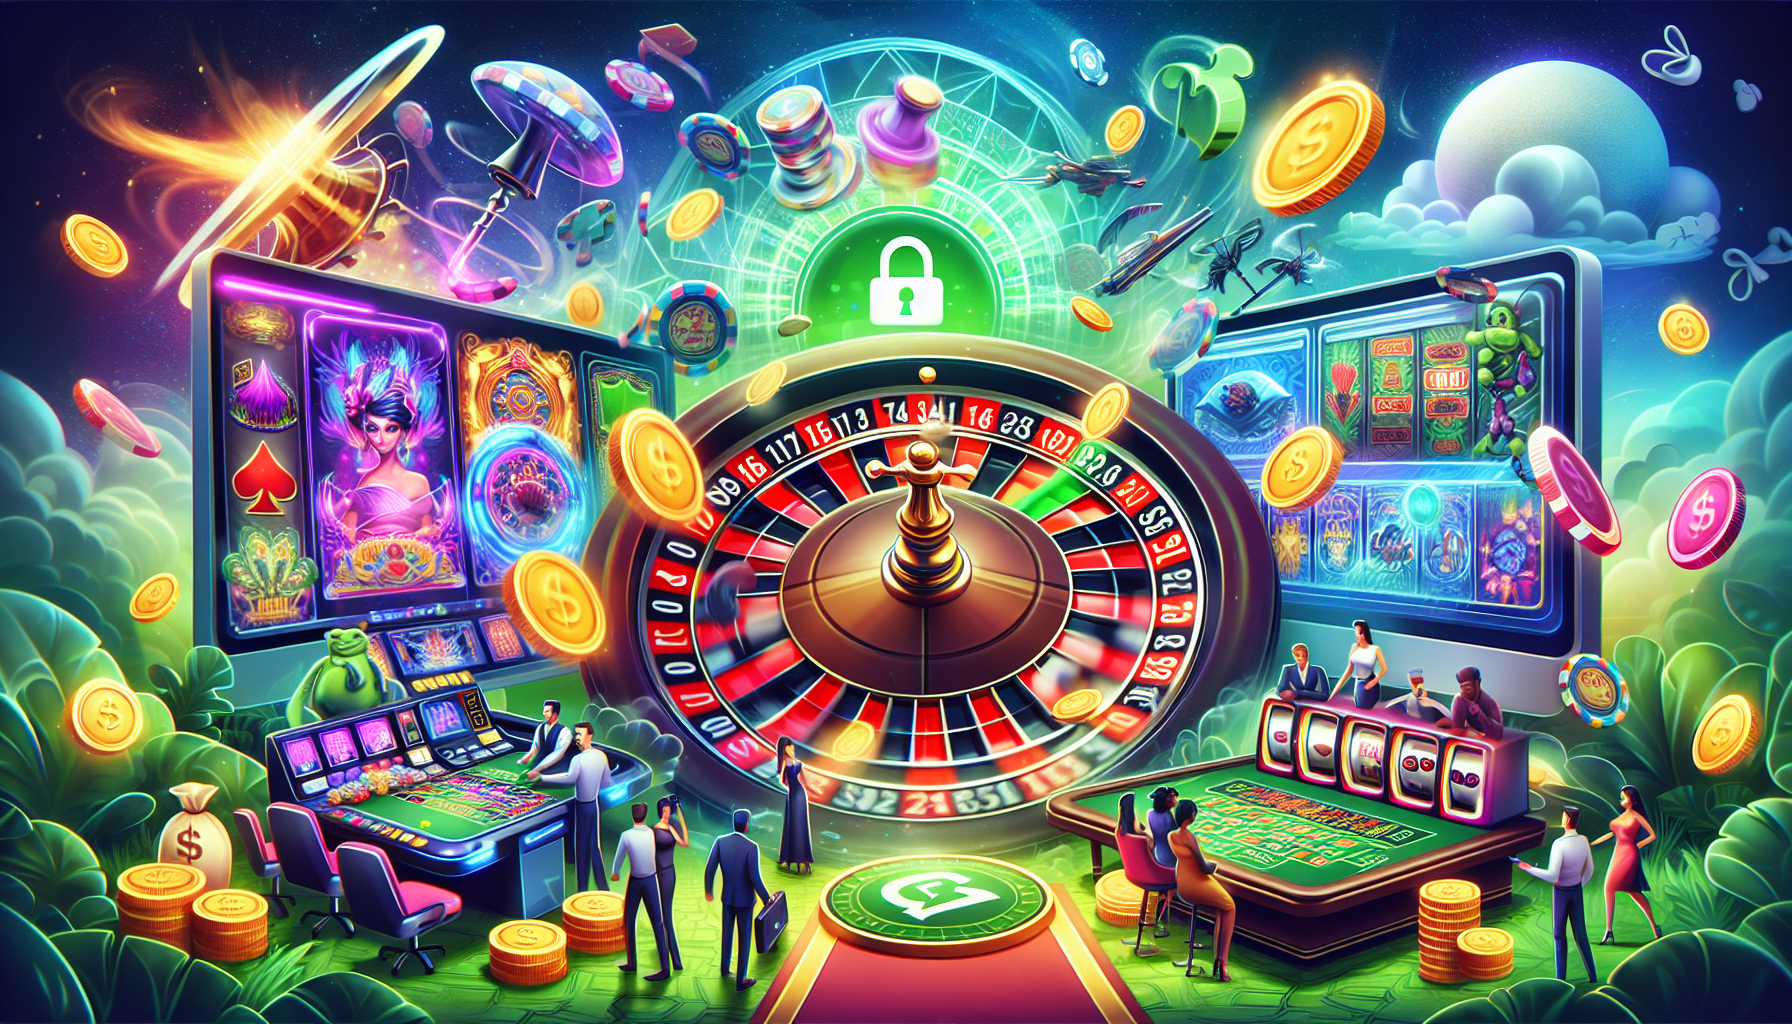 Colorful illustration of an online gaming platform with diverse game options